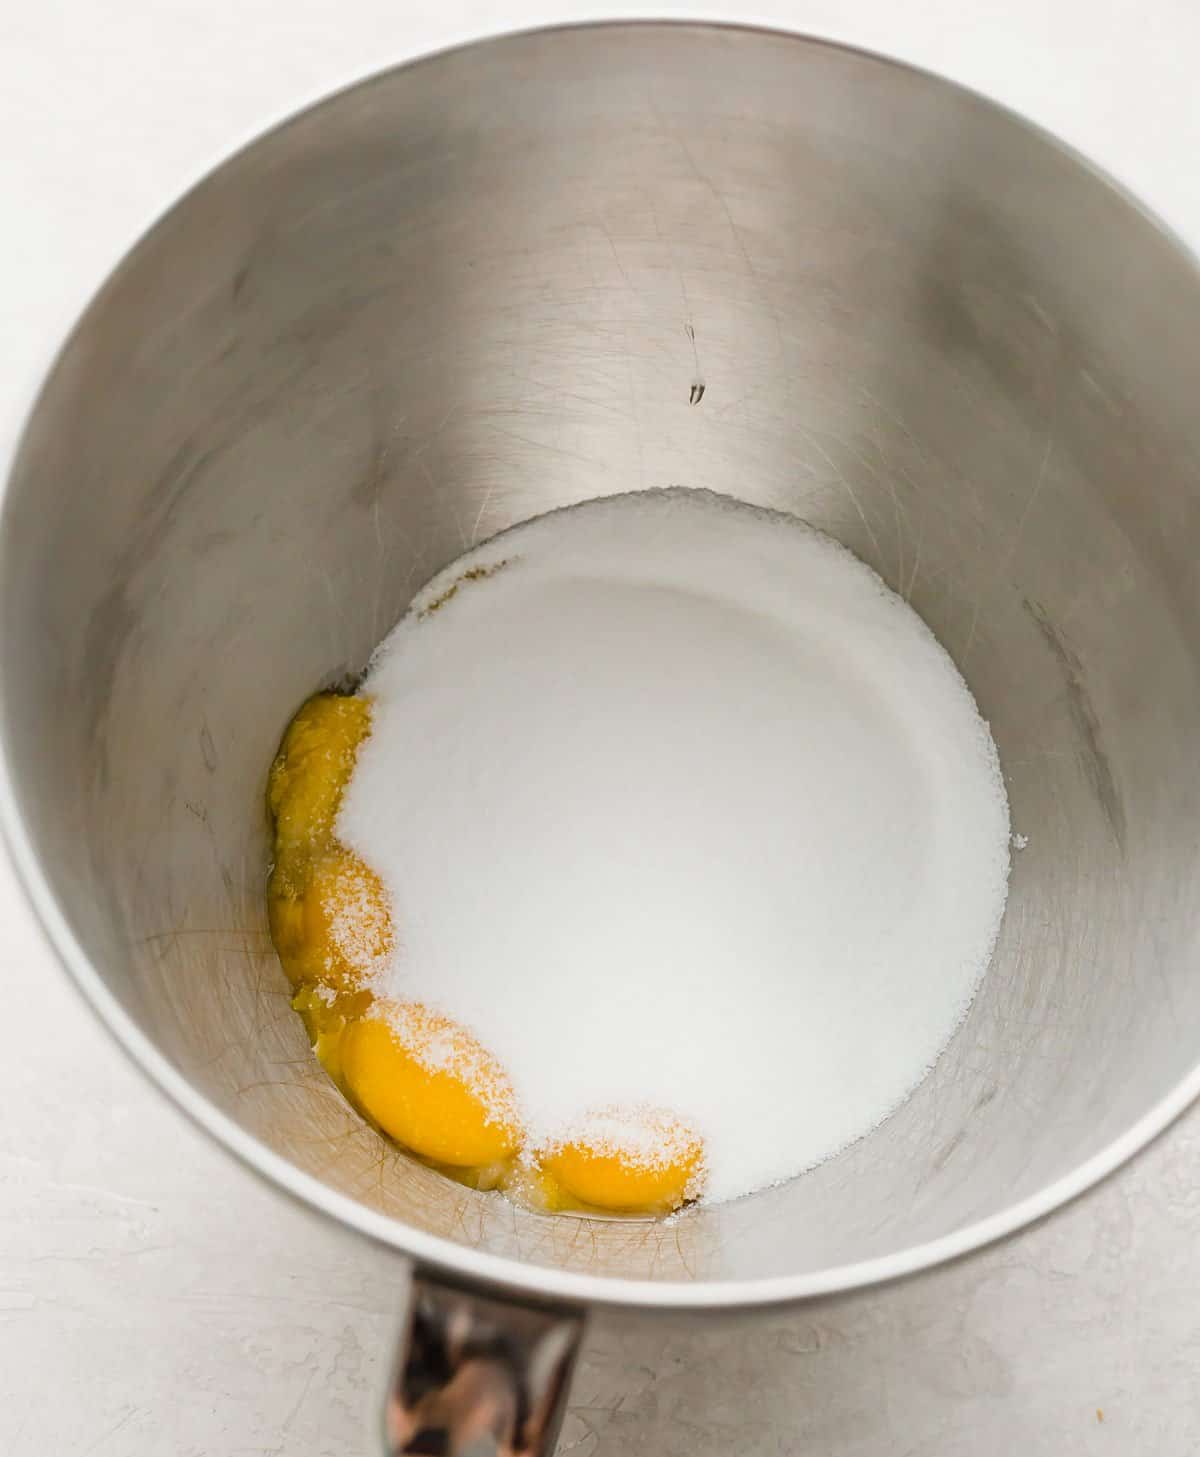 Sugar and egg yolks in a metal mixing bowl.